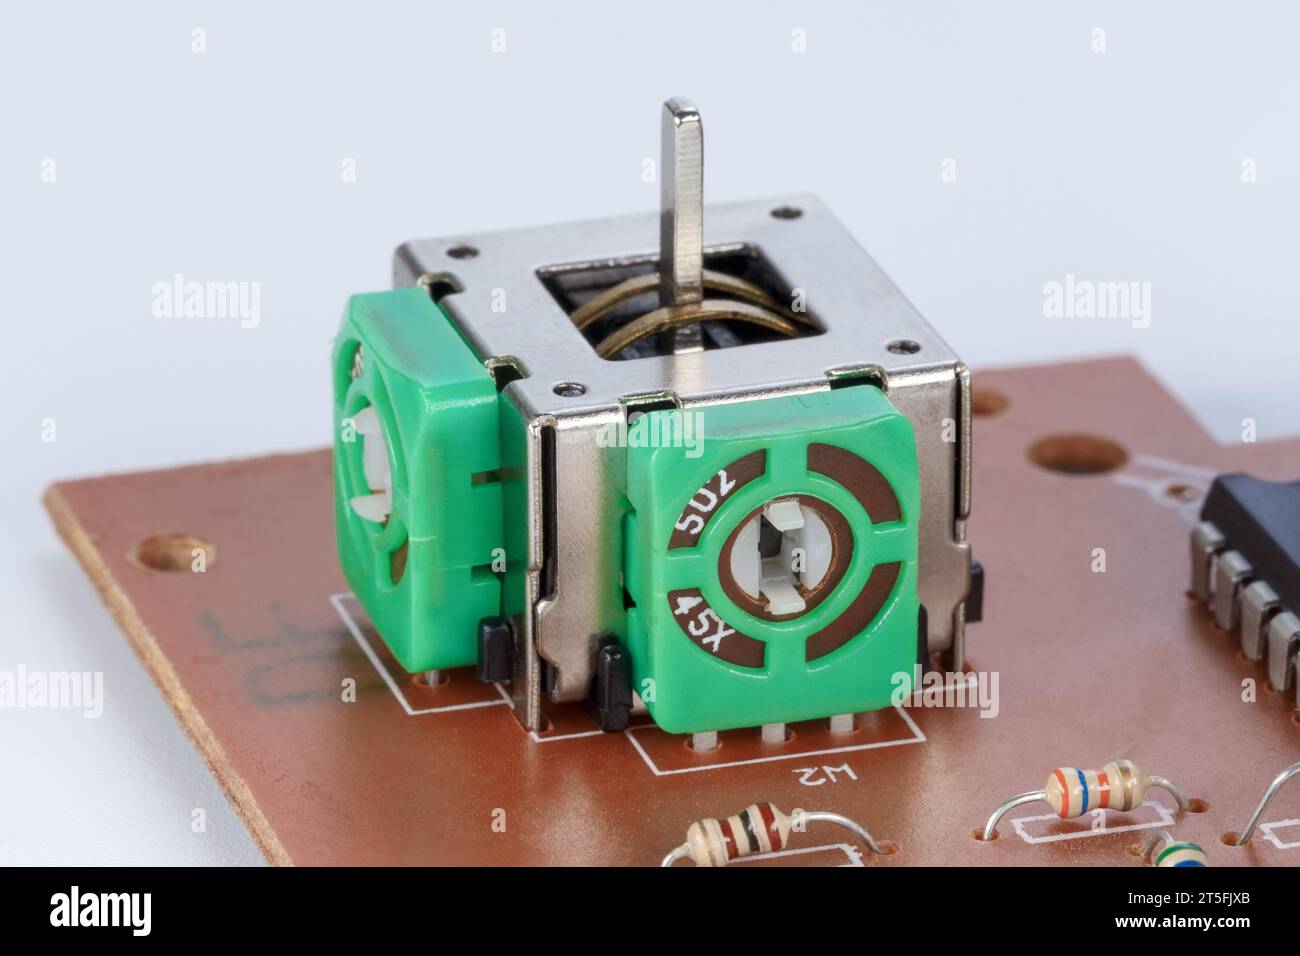 Two-axis joystick device based on potentiometers. Side view, close-up Stock Photo